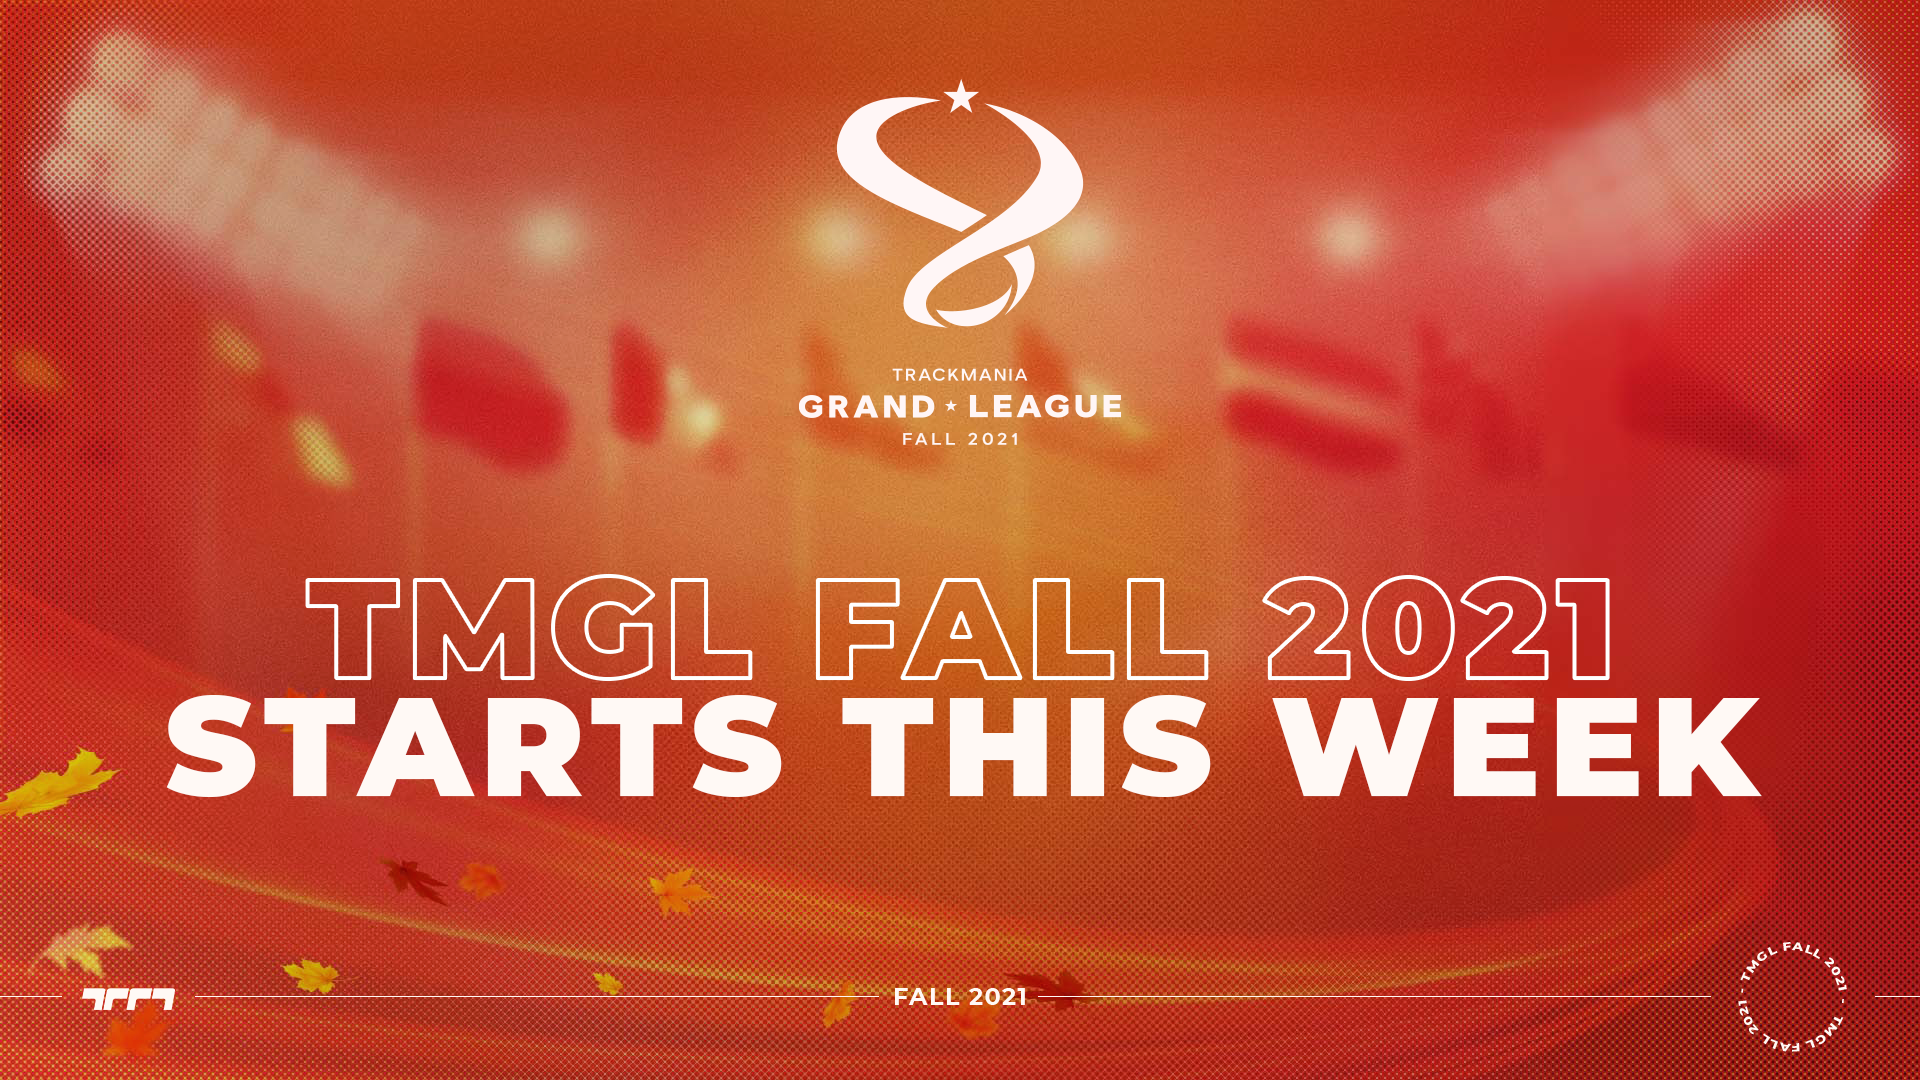 Trackmania Grand League Fall 2021 is about to start